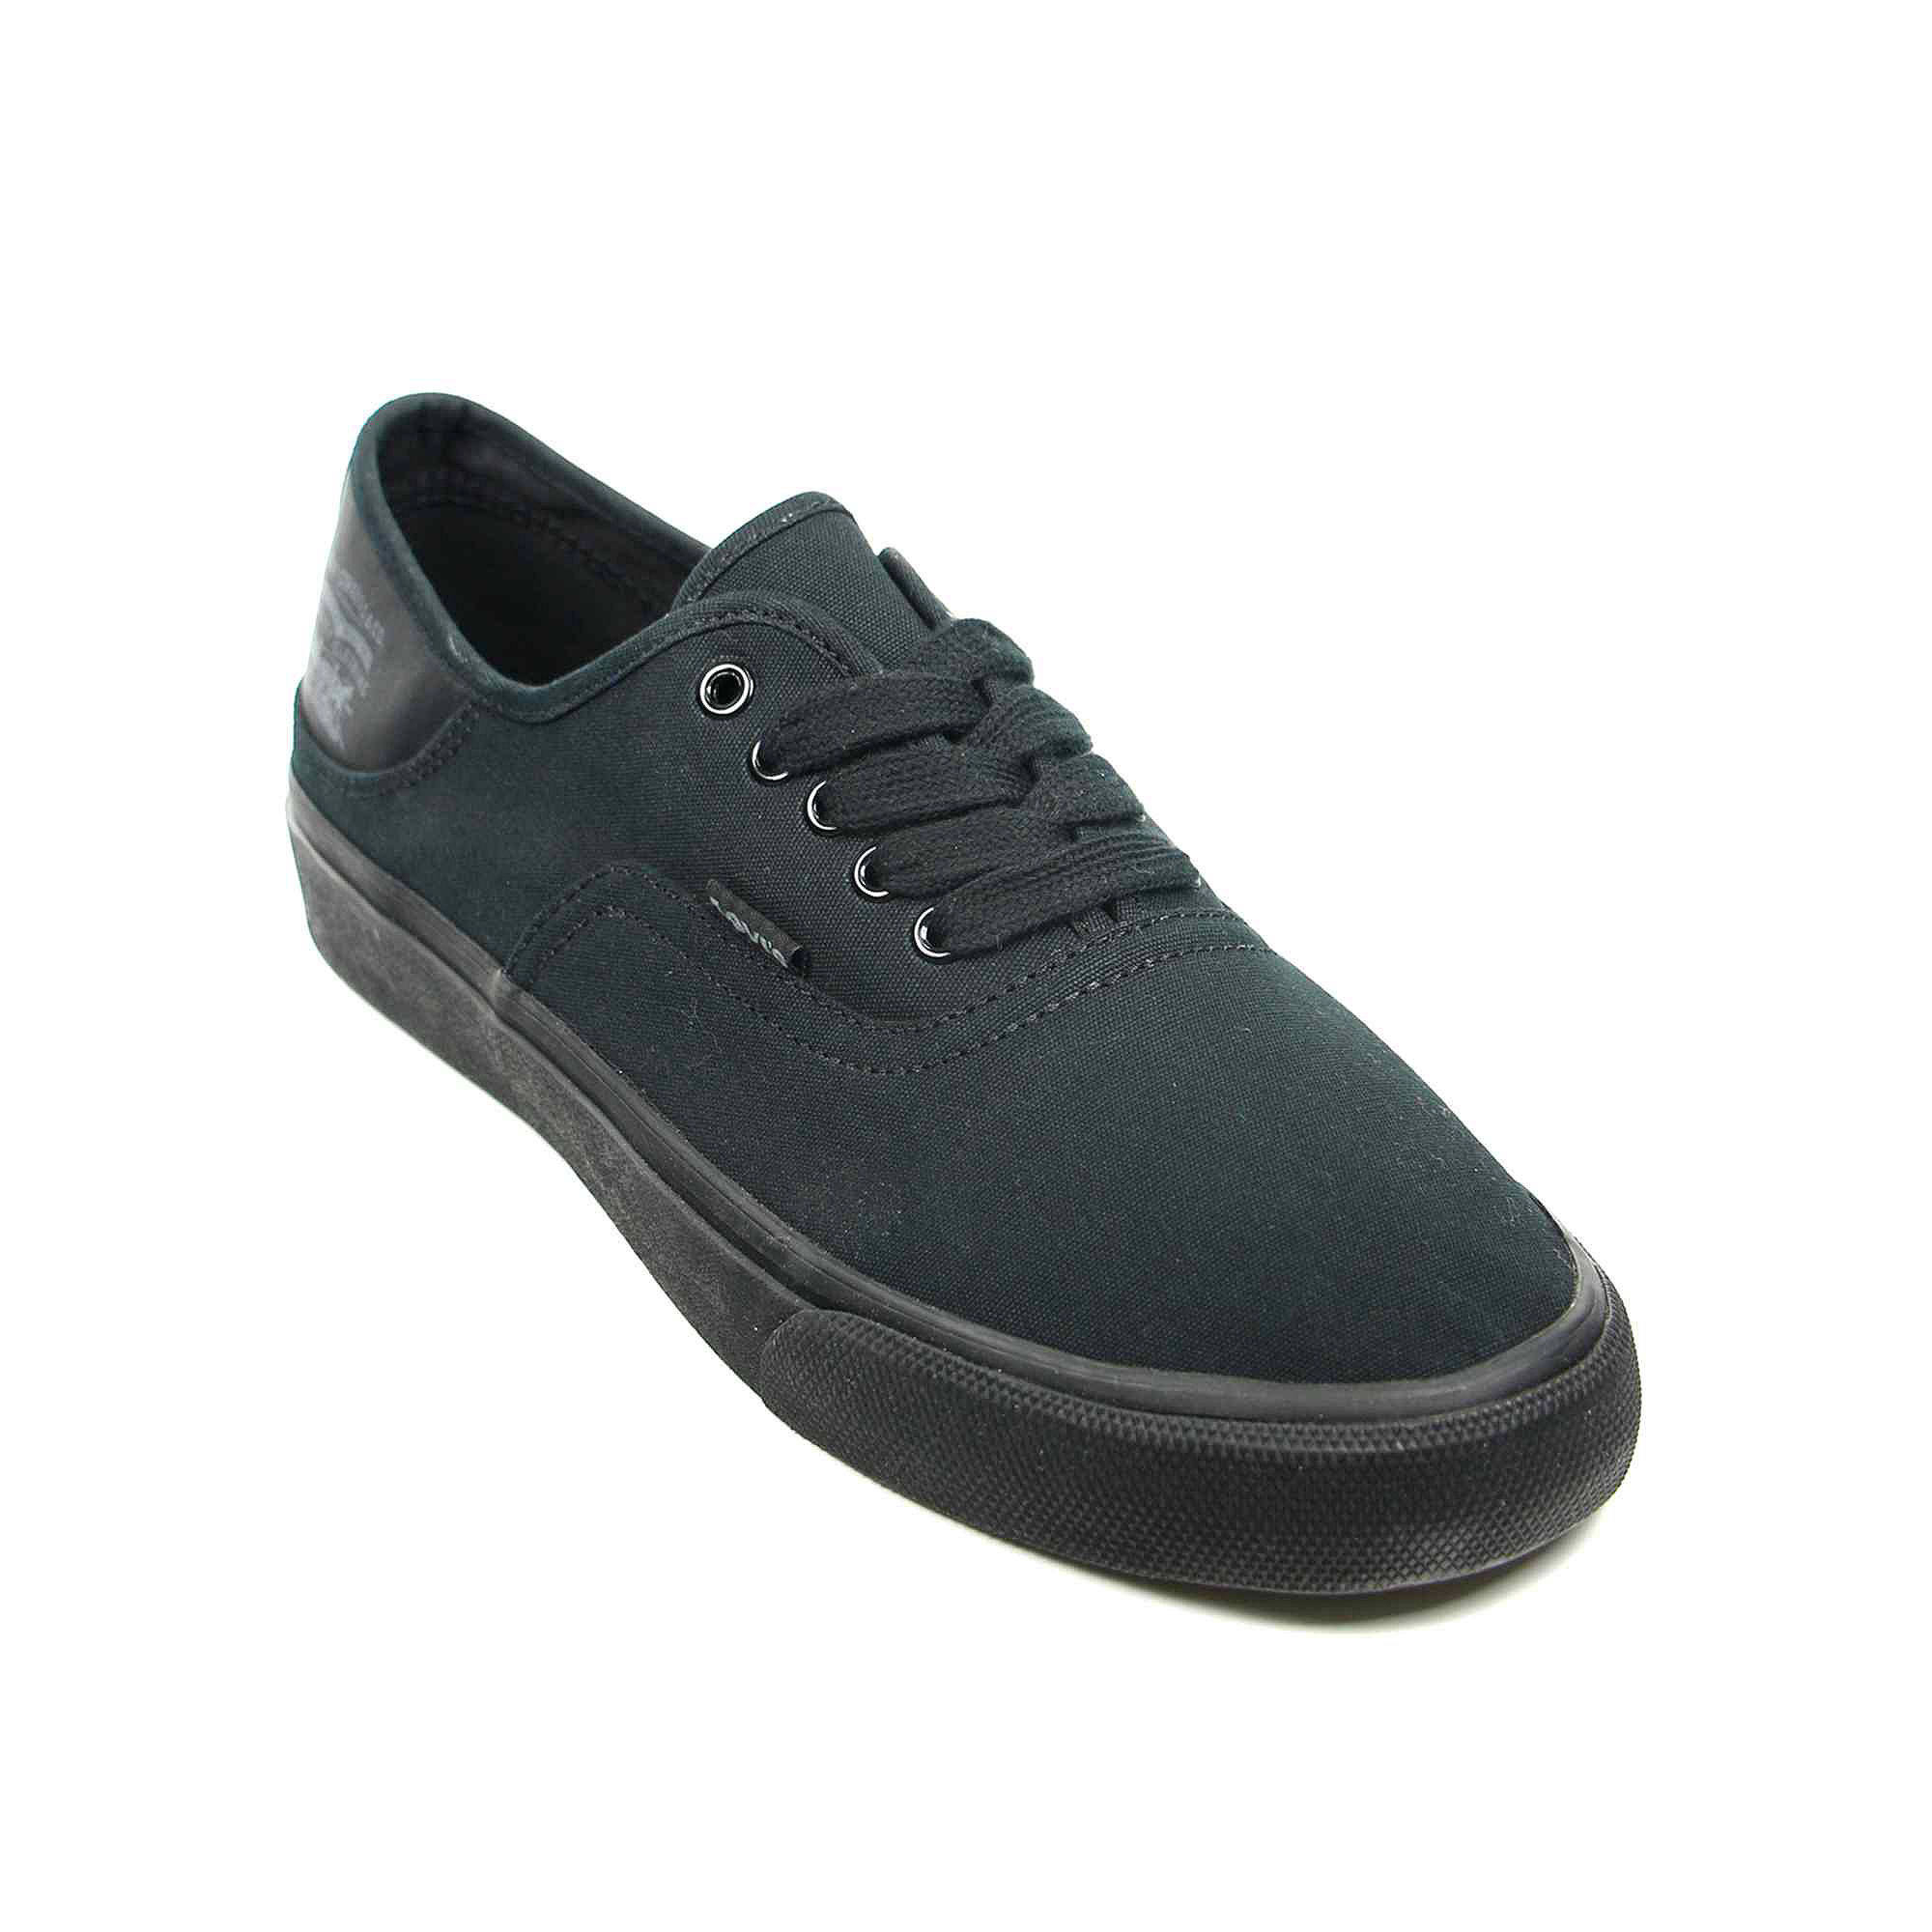 UPC 887326867995 product image for Levis Jordy Buck Mens Sneakers | upcitemdb.com